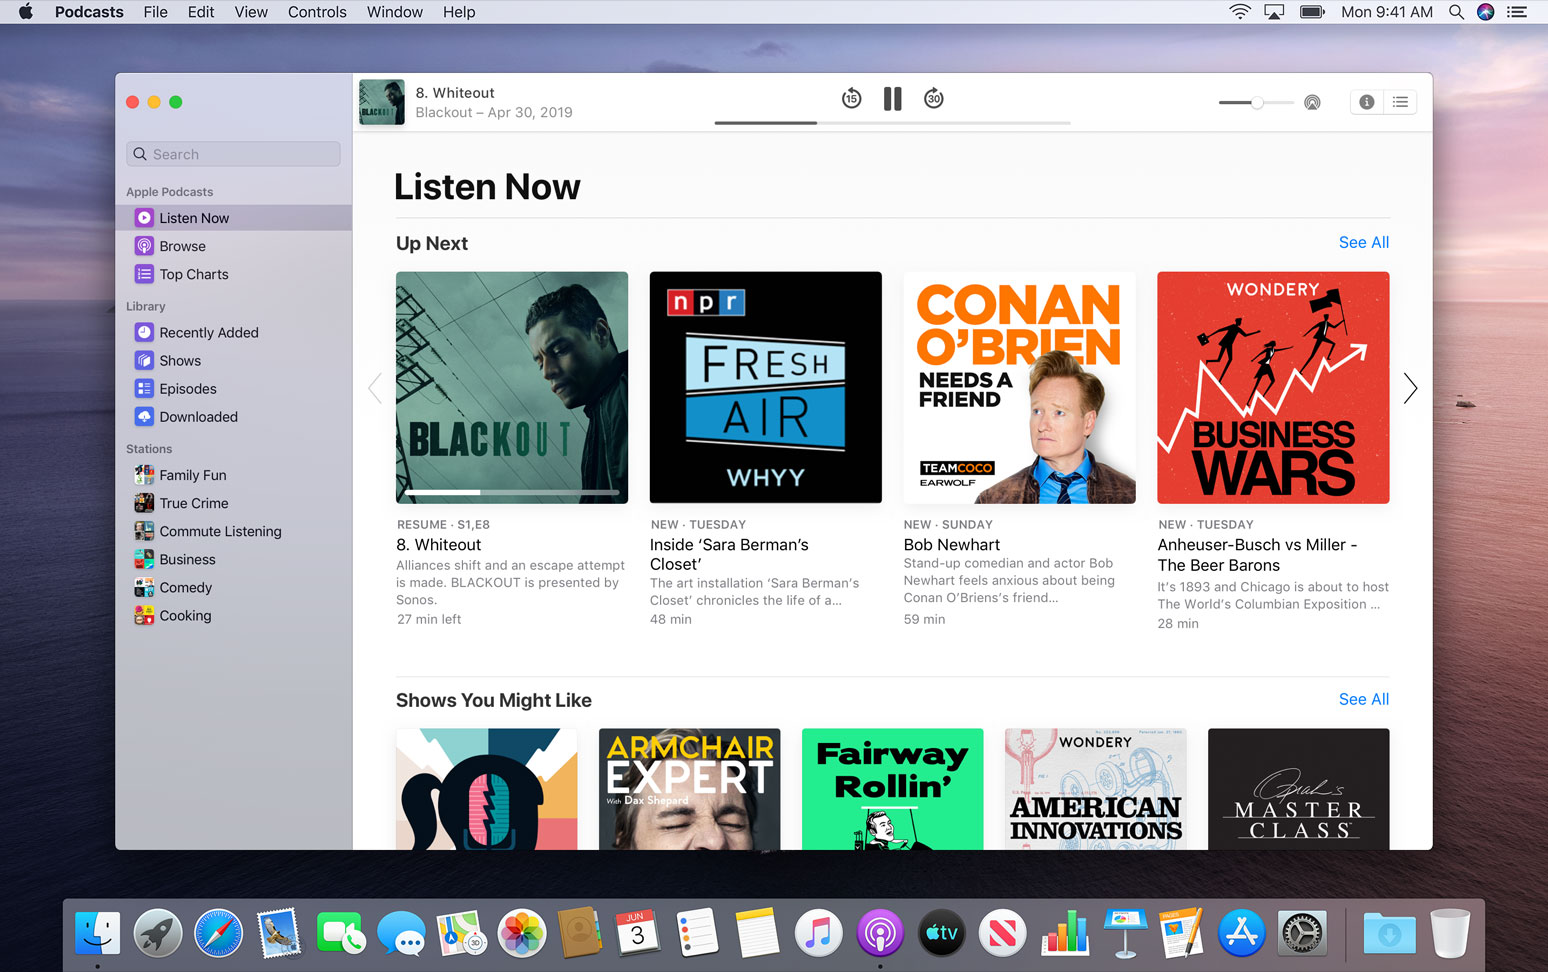 Apple Podcasts app for macOS Catalina